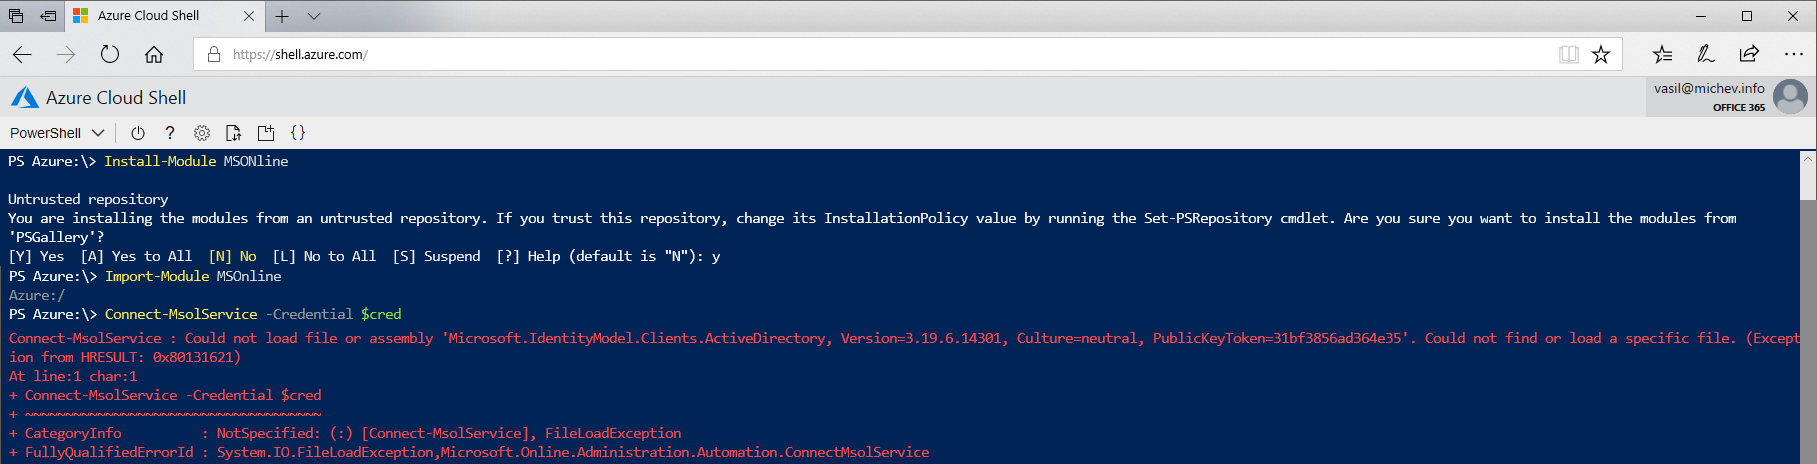 PowerShell Web Access &#8211; Just how practical is it?